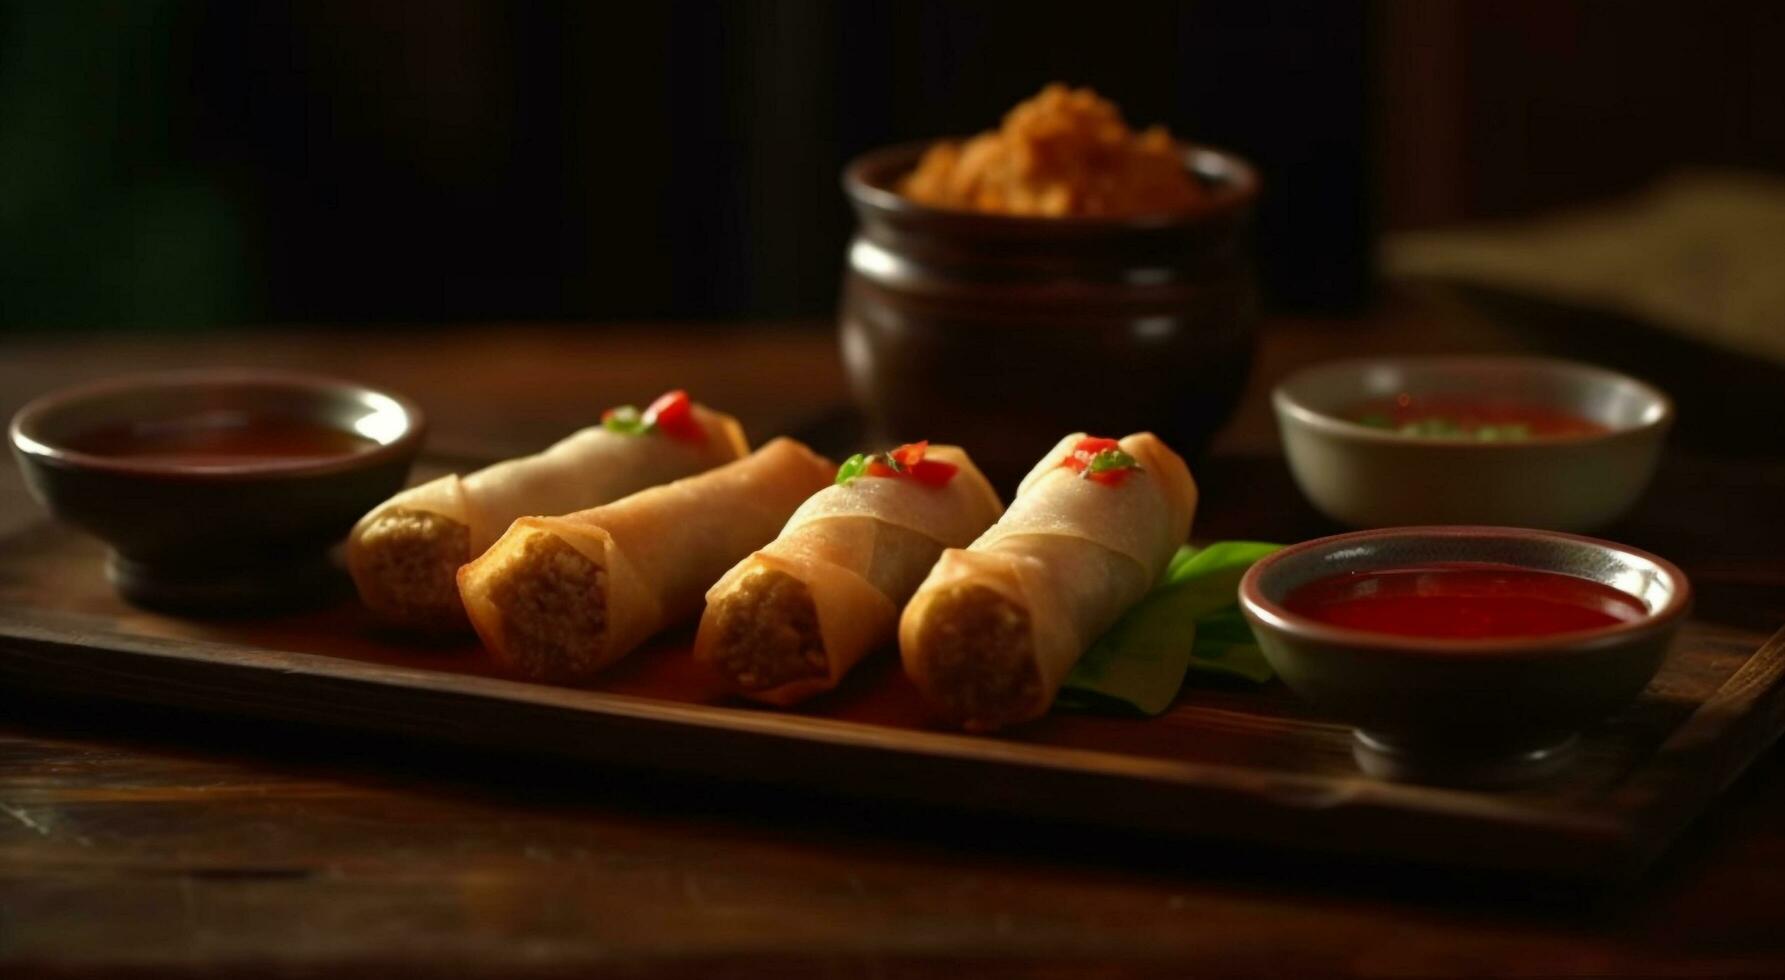 Freshness rolled up in a spring roll, a savory appetizer generated by AI photo